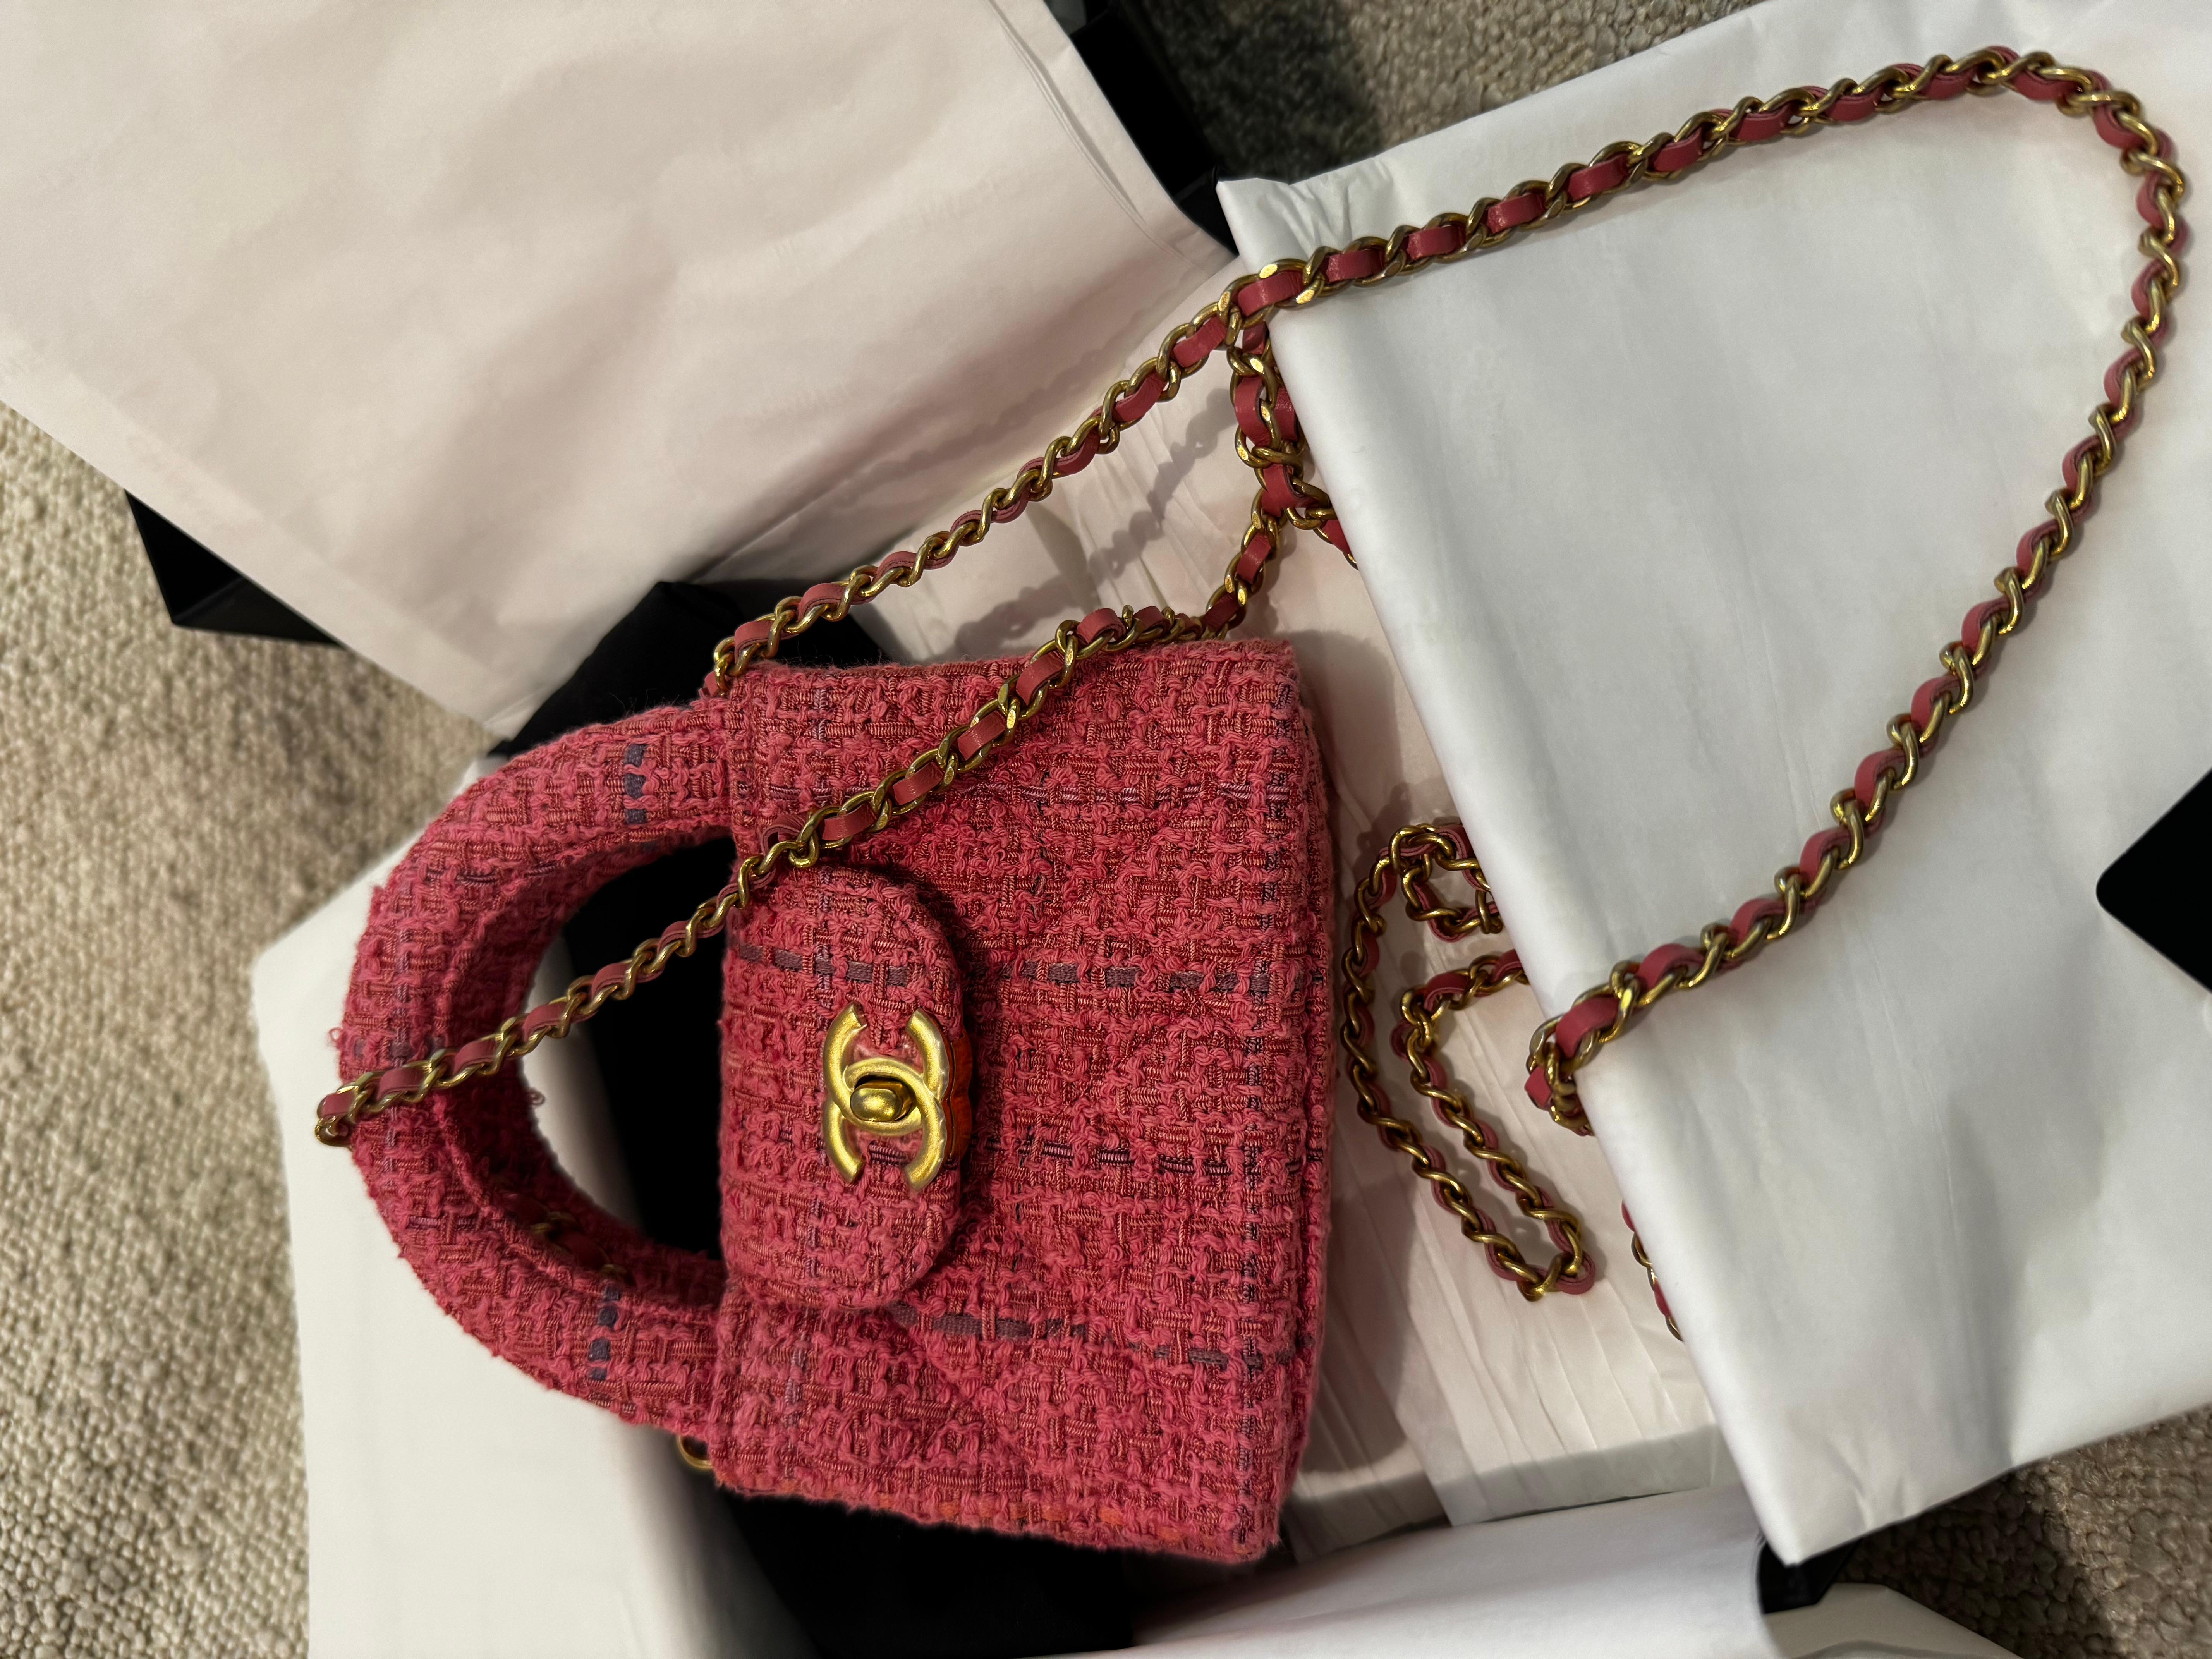 Chanel Rich Pink purple stripe Tweed Kelly bag.
Chanel beautiful tweed with gold hardware kelly shopping bag. 24 collection. So rare and never done before in tweed!
Comes with all original Chanel packaging, included dustbag, box, ribbon and camellia